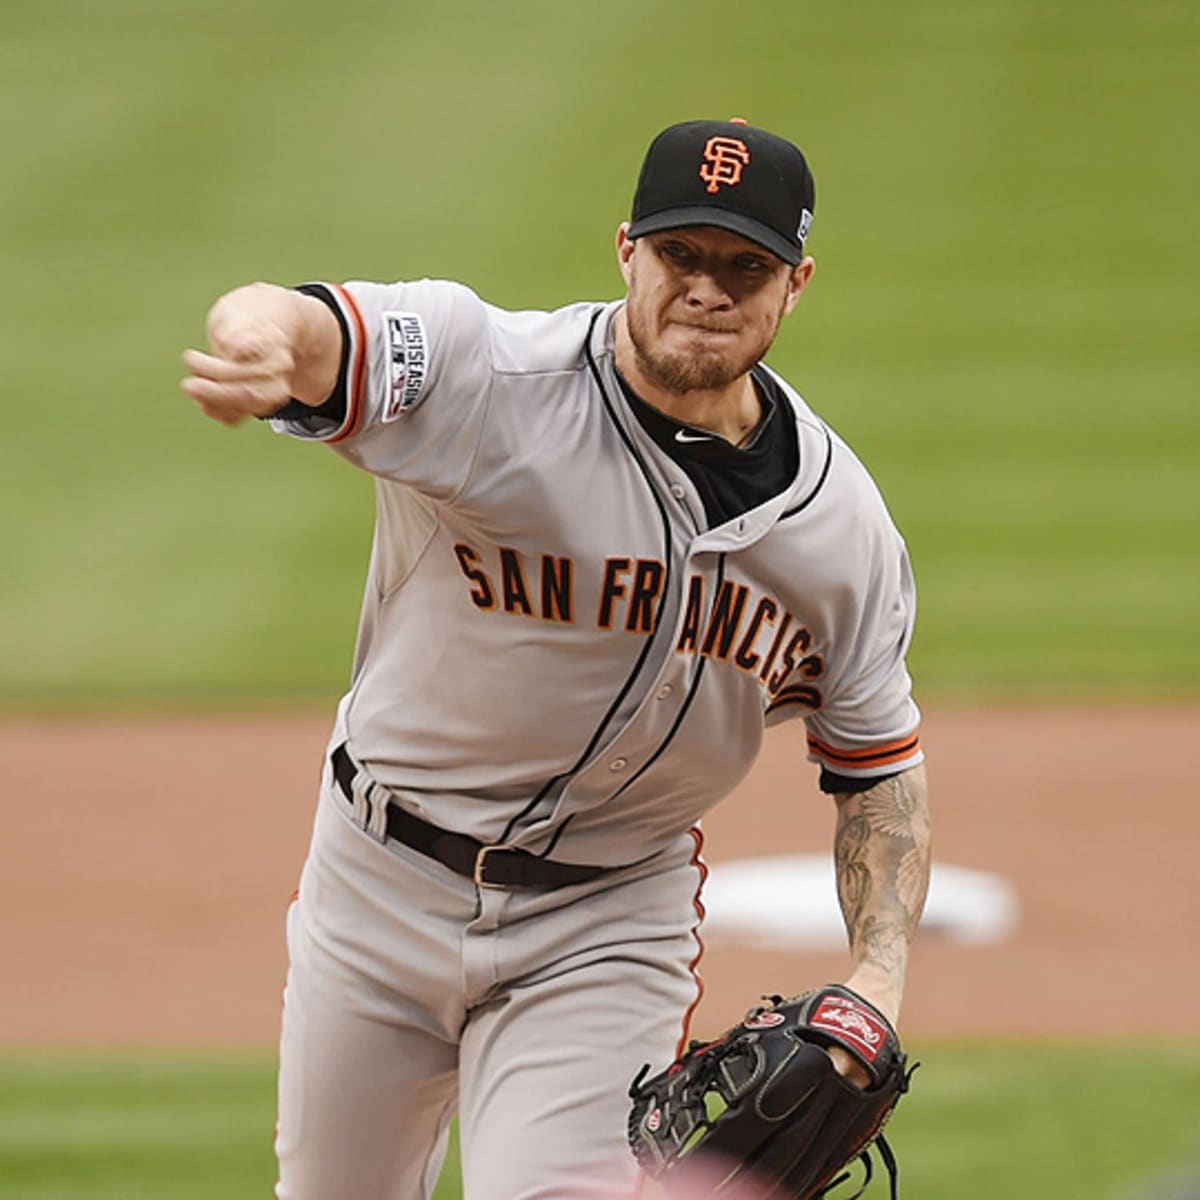 Check out how Cy Young Award winner Jake Peavy gripped his pitches